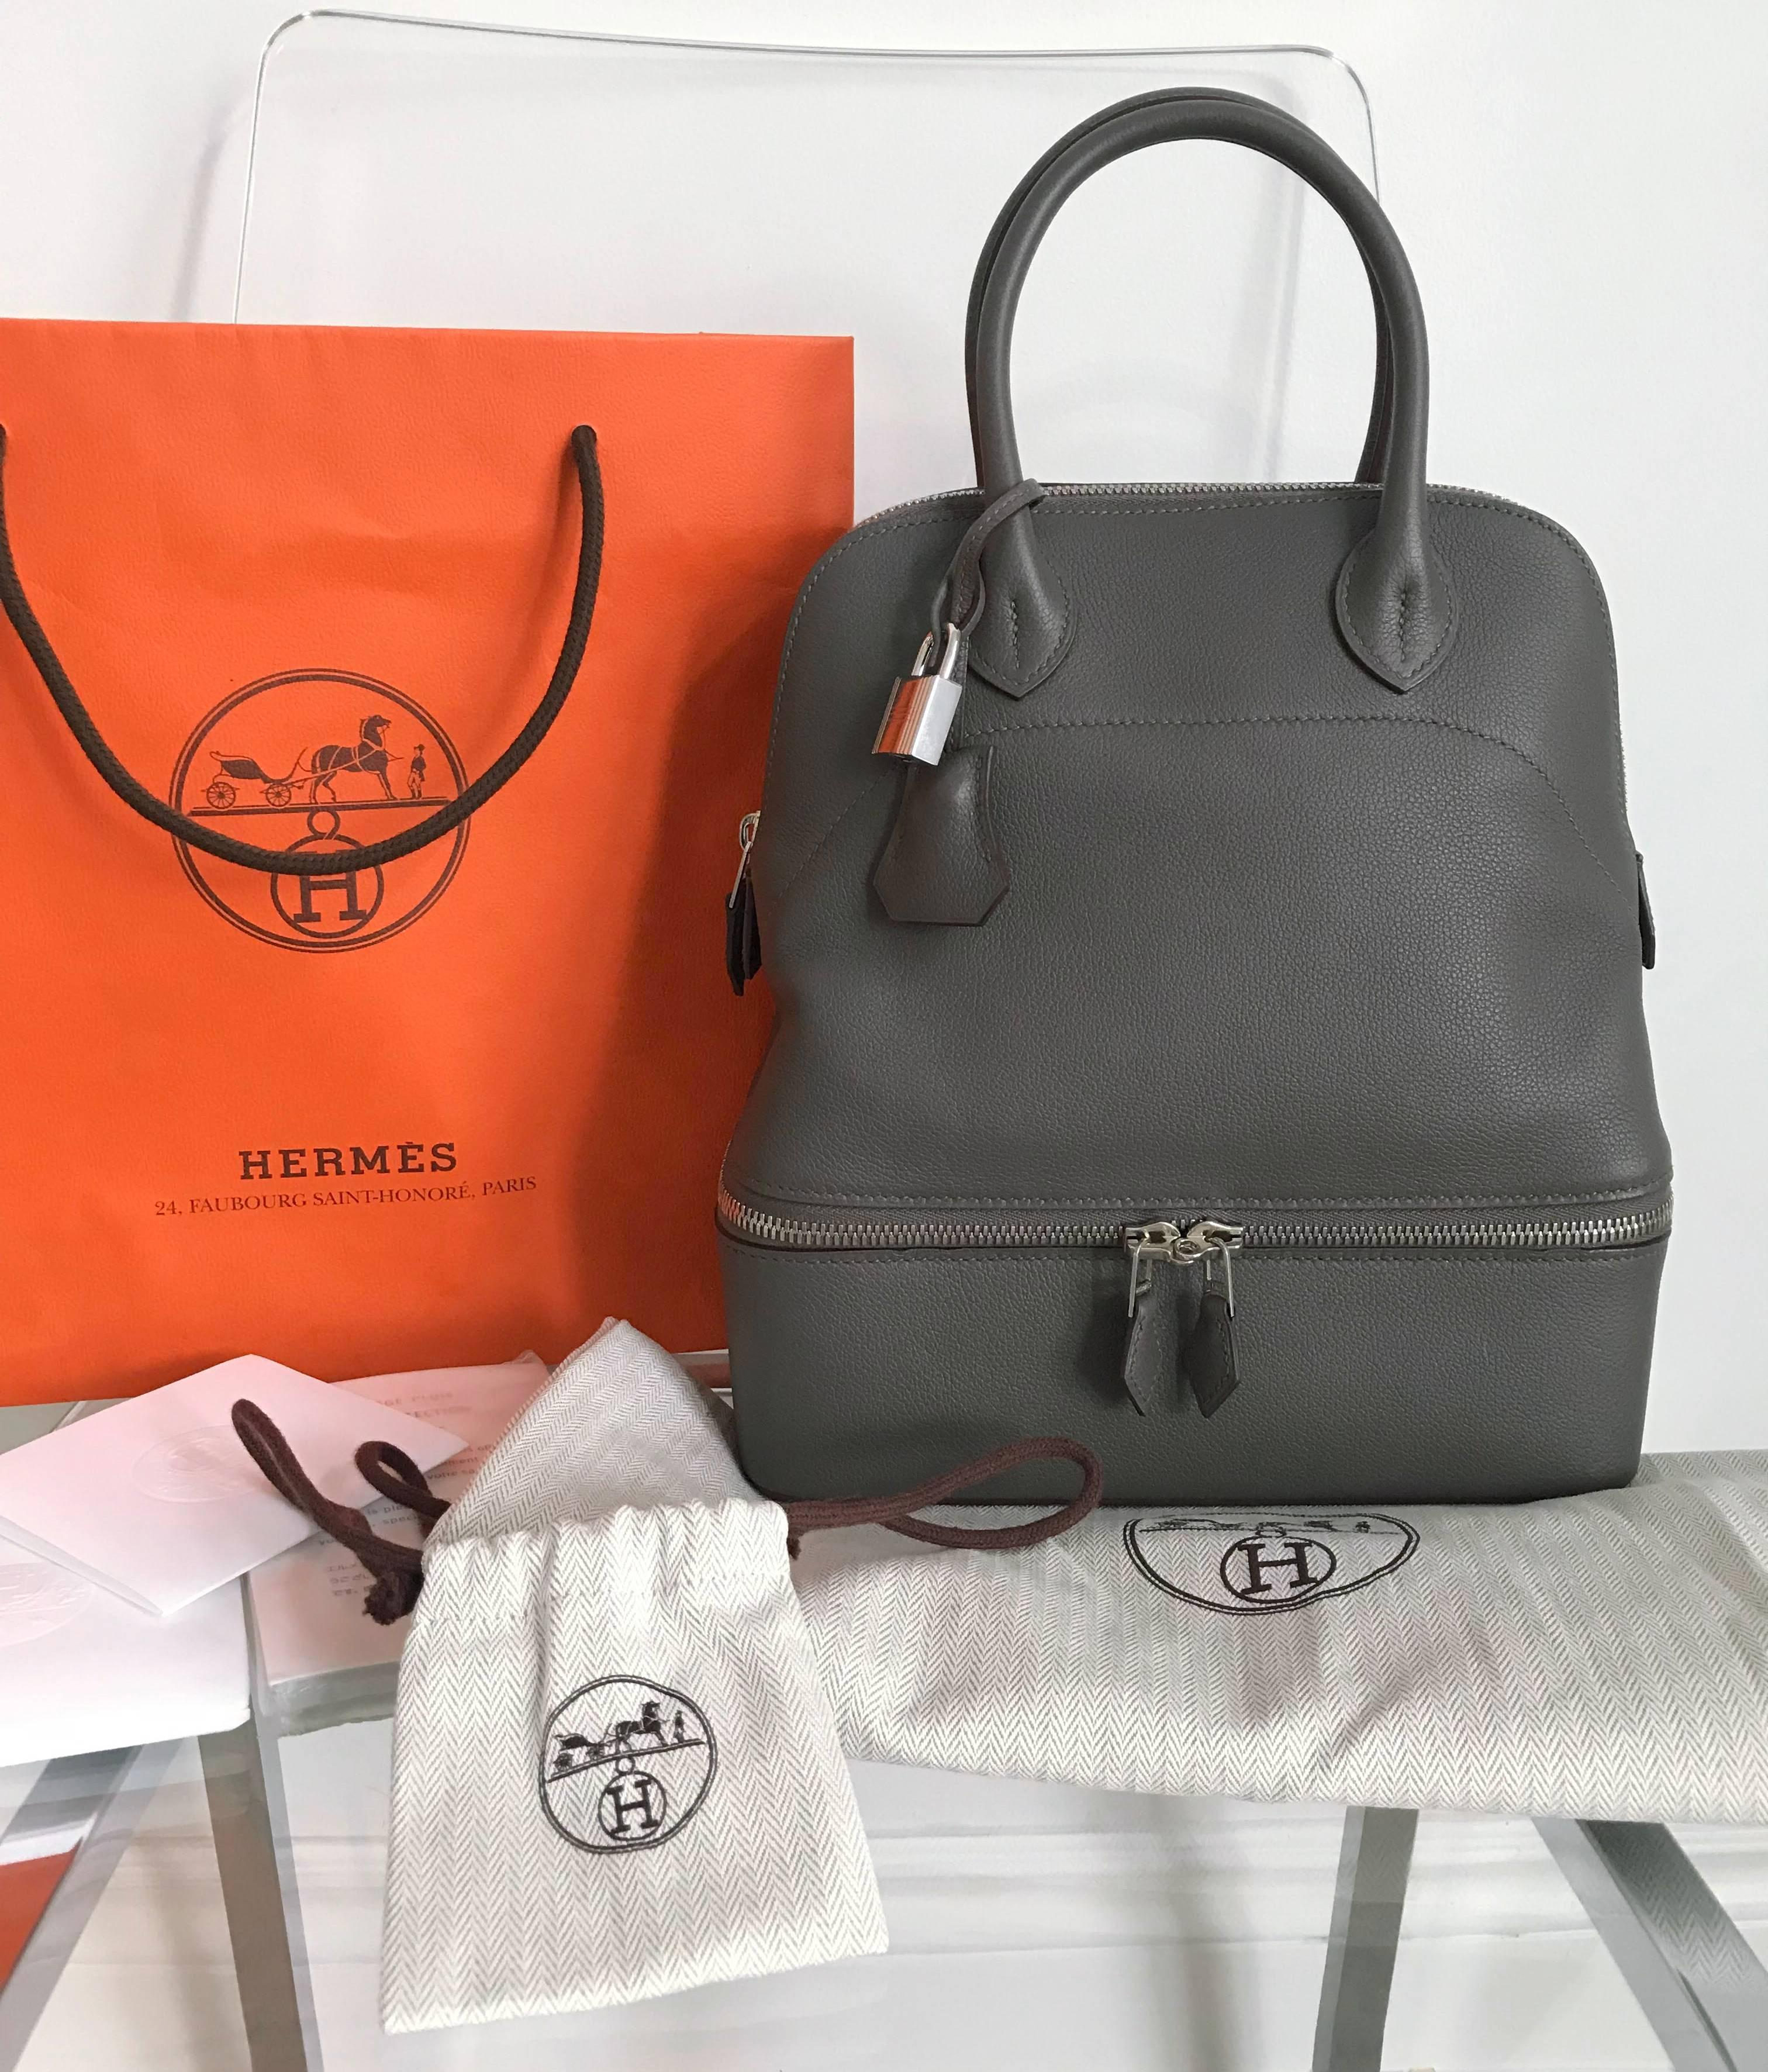 Hermes Bolide Secret bag with double zippered bottom compartment.  PM small size measuring 24 x 27 x 10cm. Smooth Veau Evercolor leather, Etain color, and palladium hardware.  Double handle design with top zipper, two flat interior pockets, and